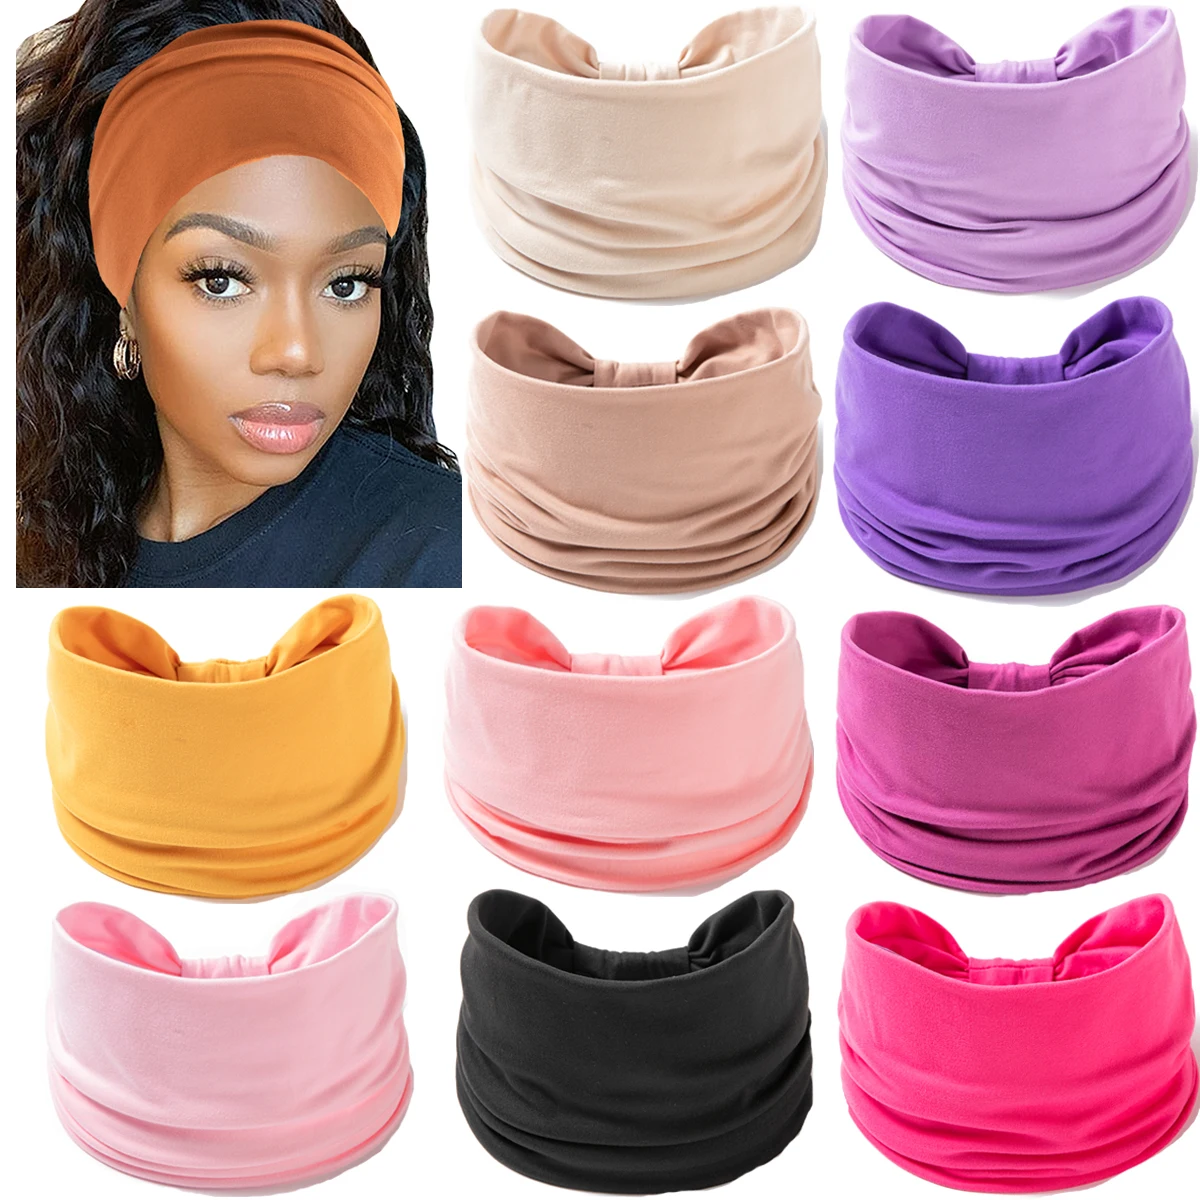 Wide Headband For Women Black Stylish Head Wraps Boho Thick Hairbands Large African Sport Yoga Turban Hair Band Hair Accessories 10mm thick yoga mat